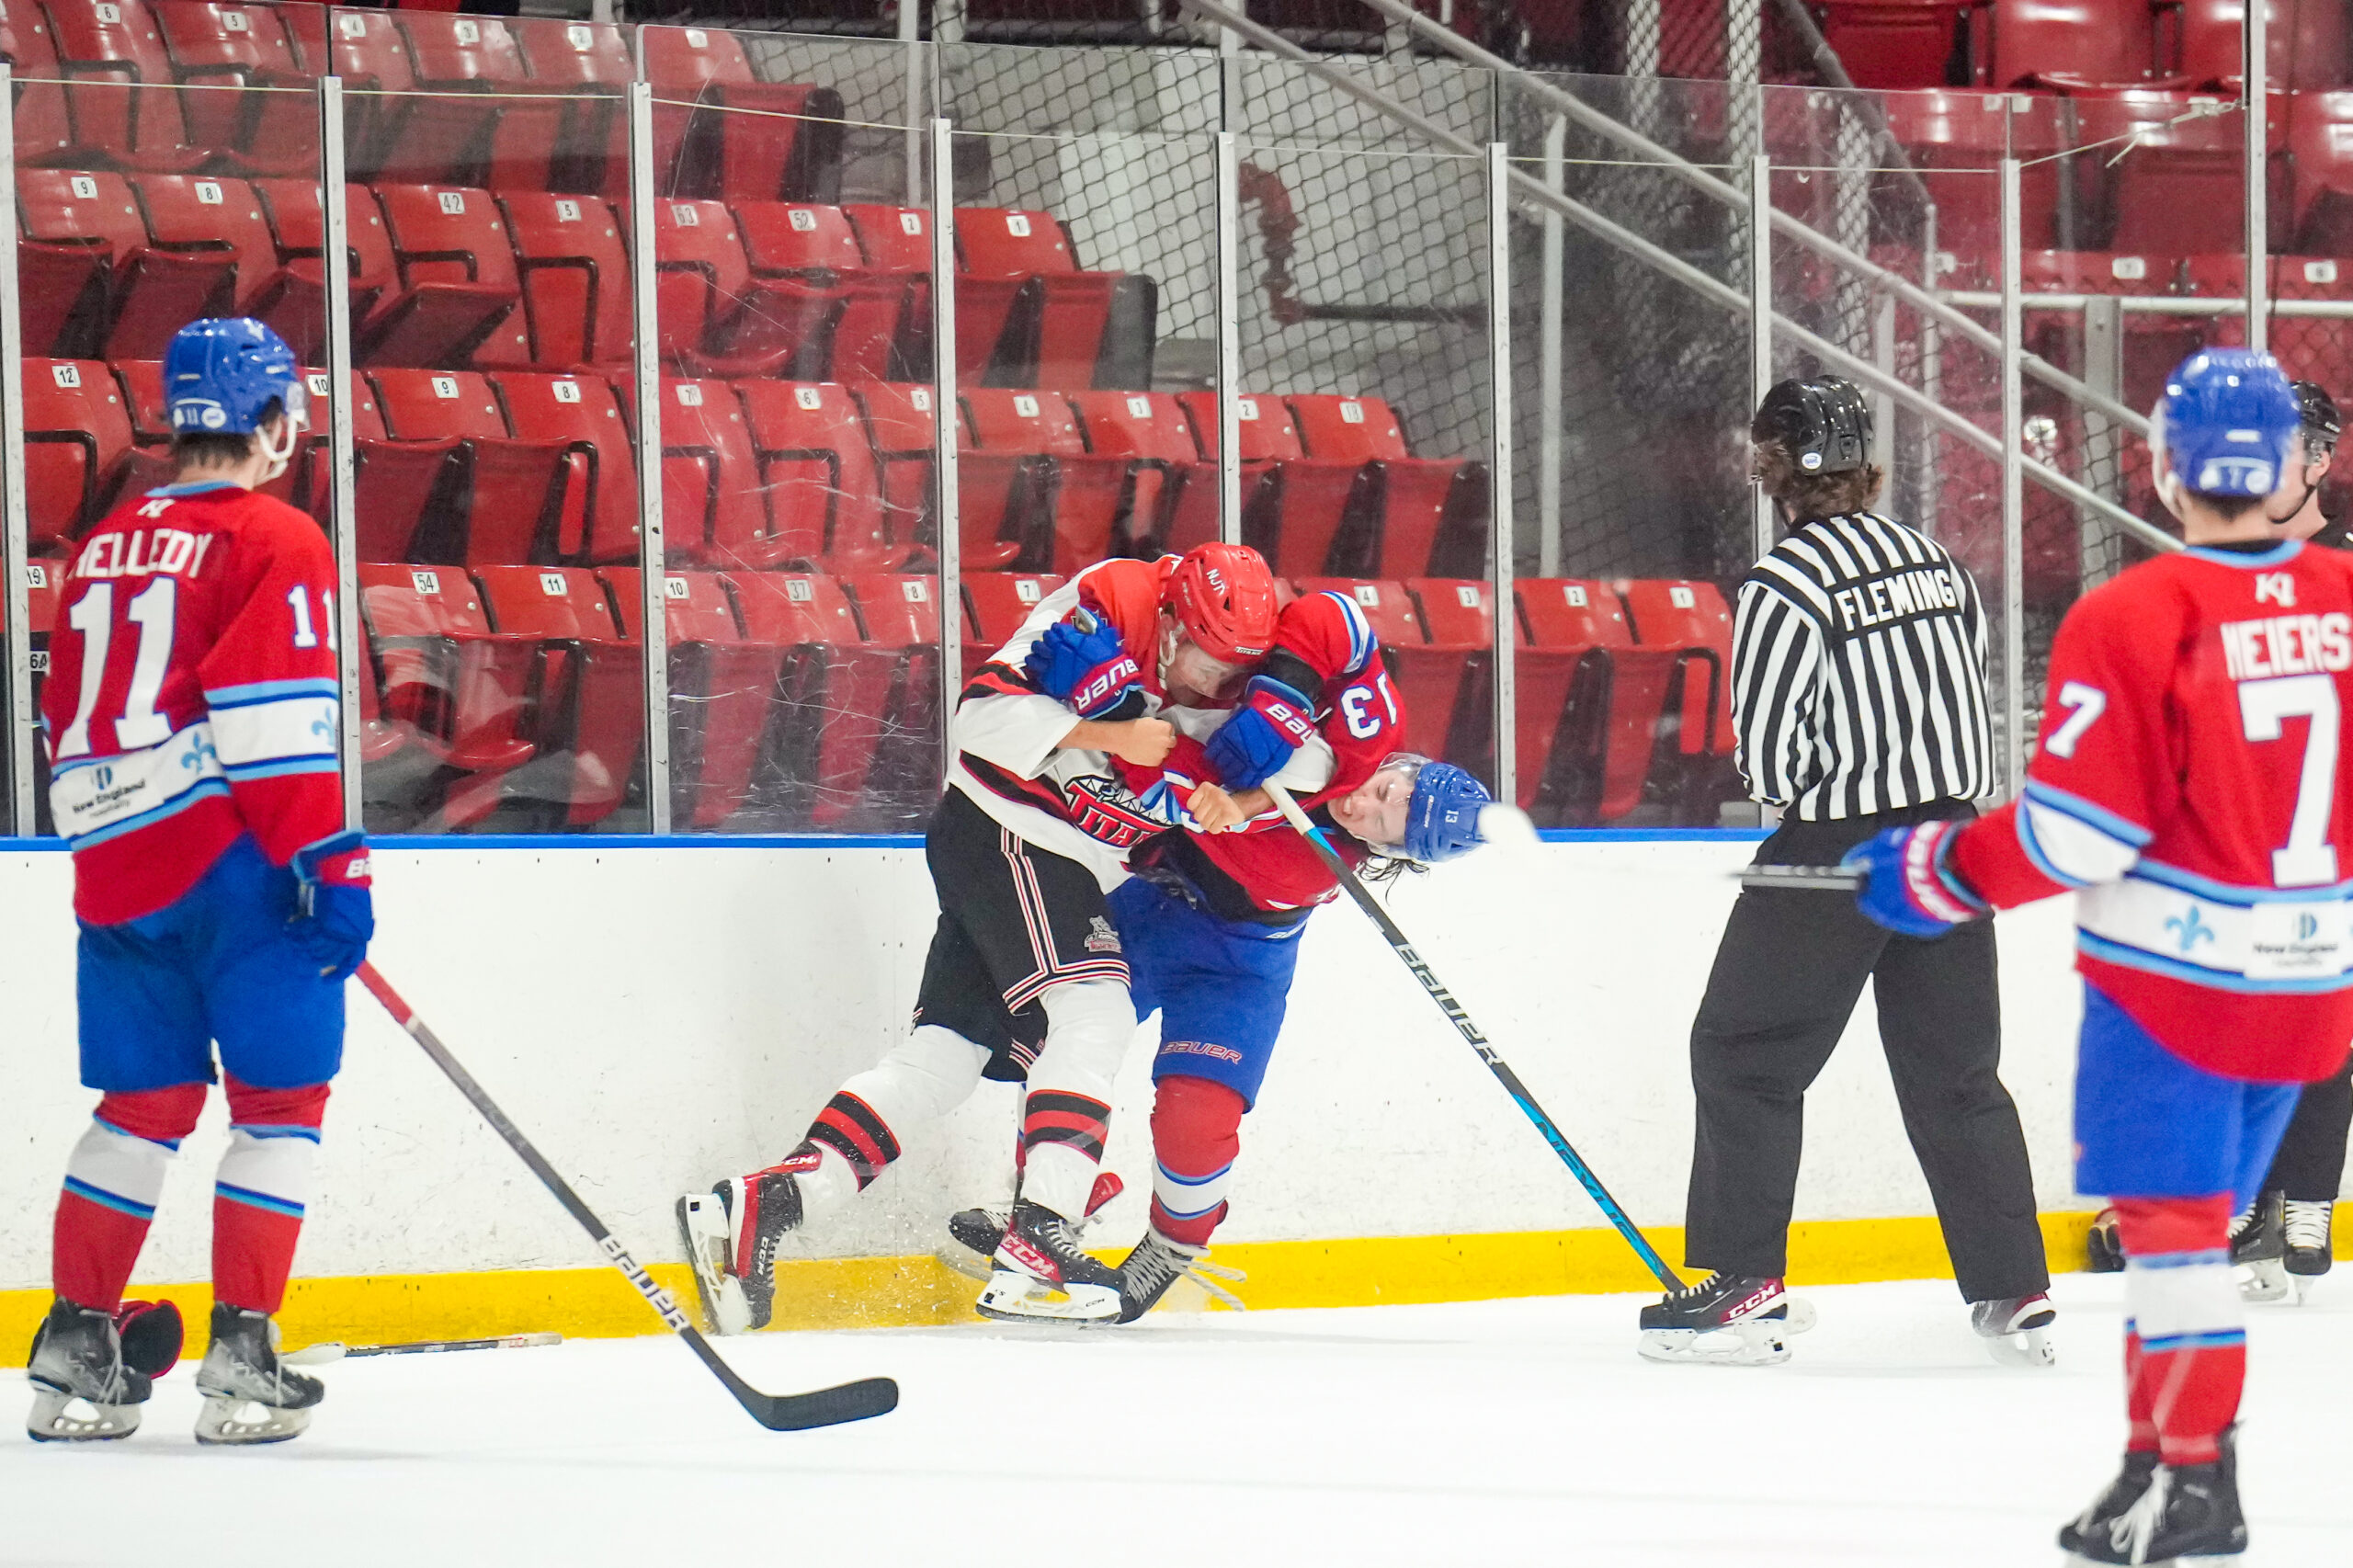 Titans fall 6 – 5 in OT to Nordiques in seesaw game